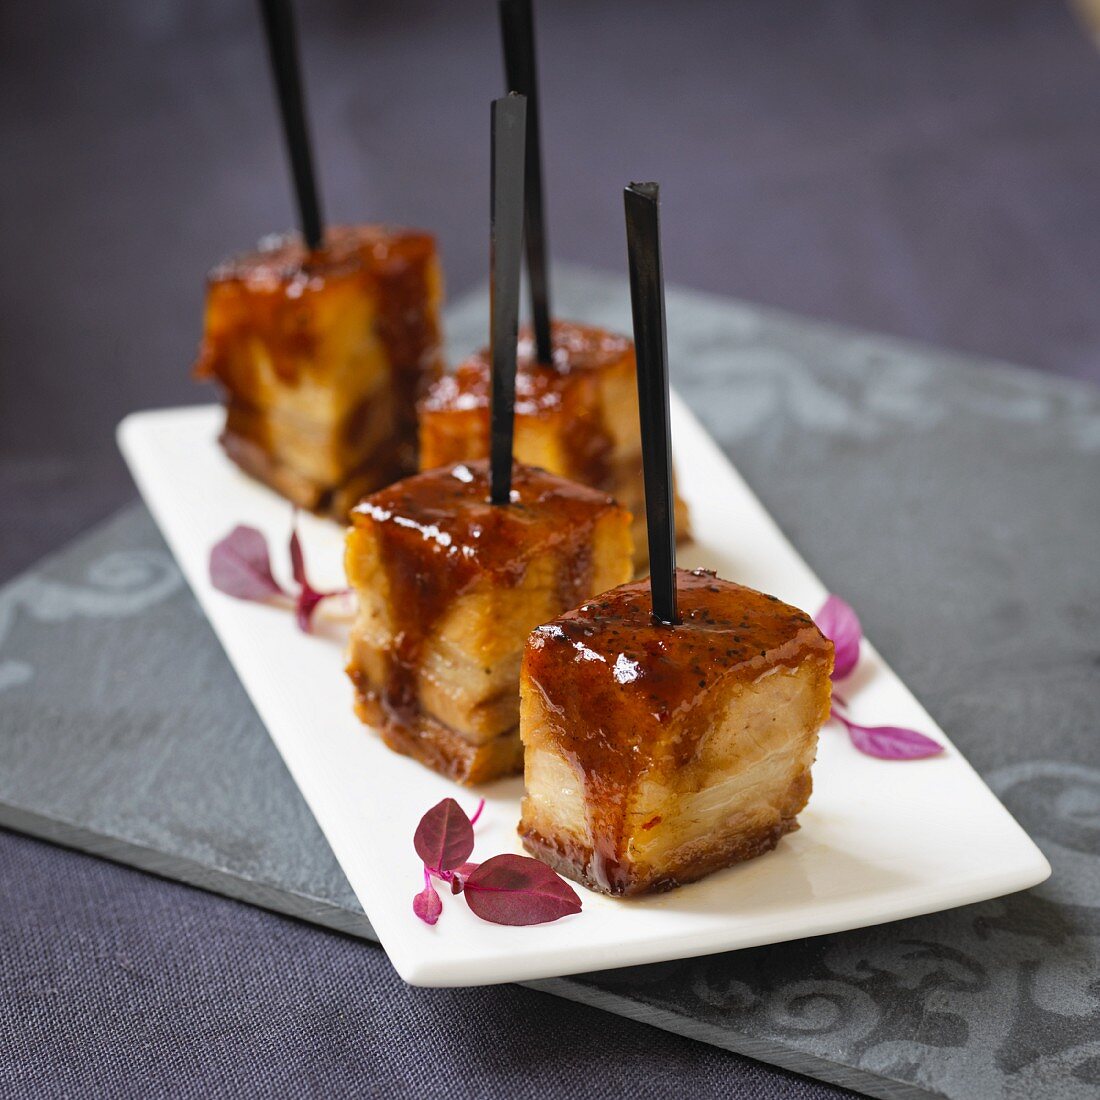 Grilled cubes of pork belly on sticks (Asia)